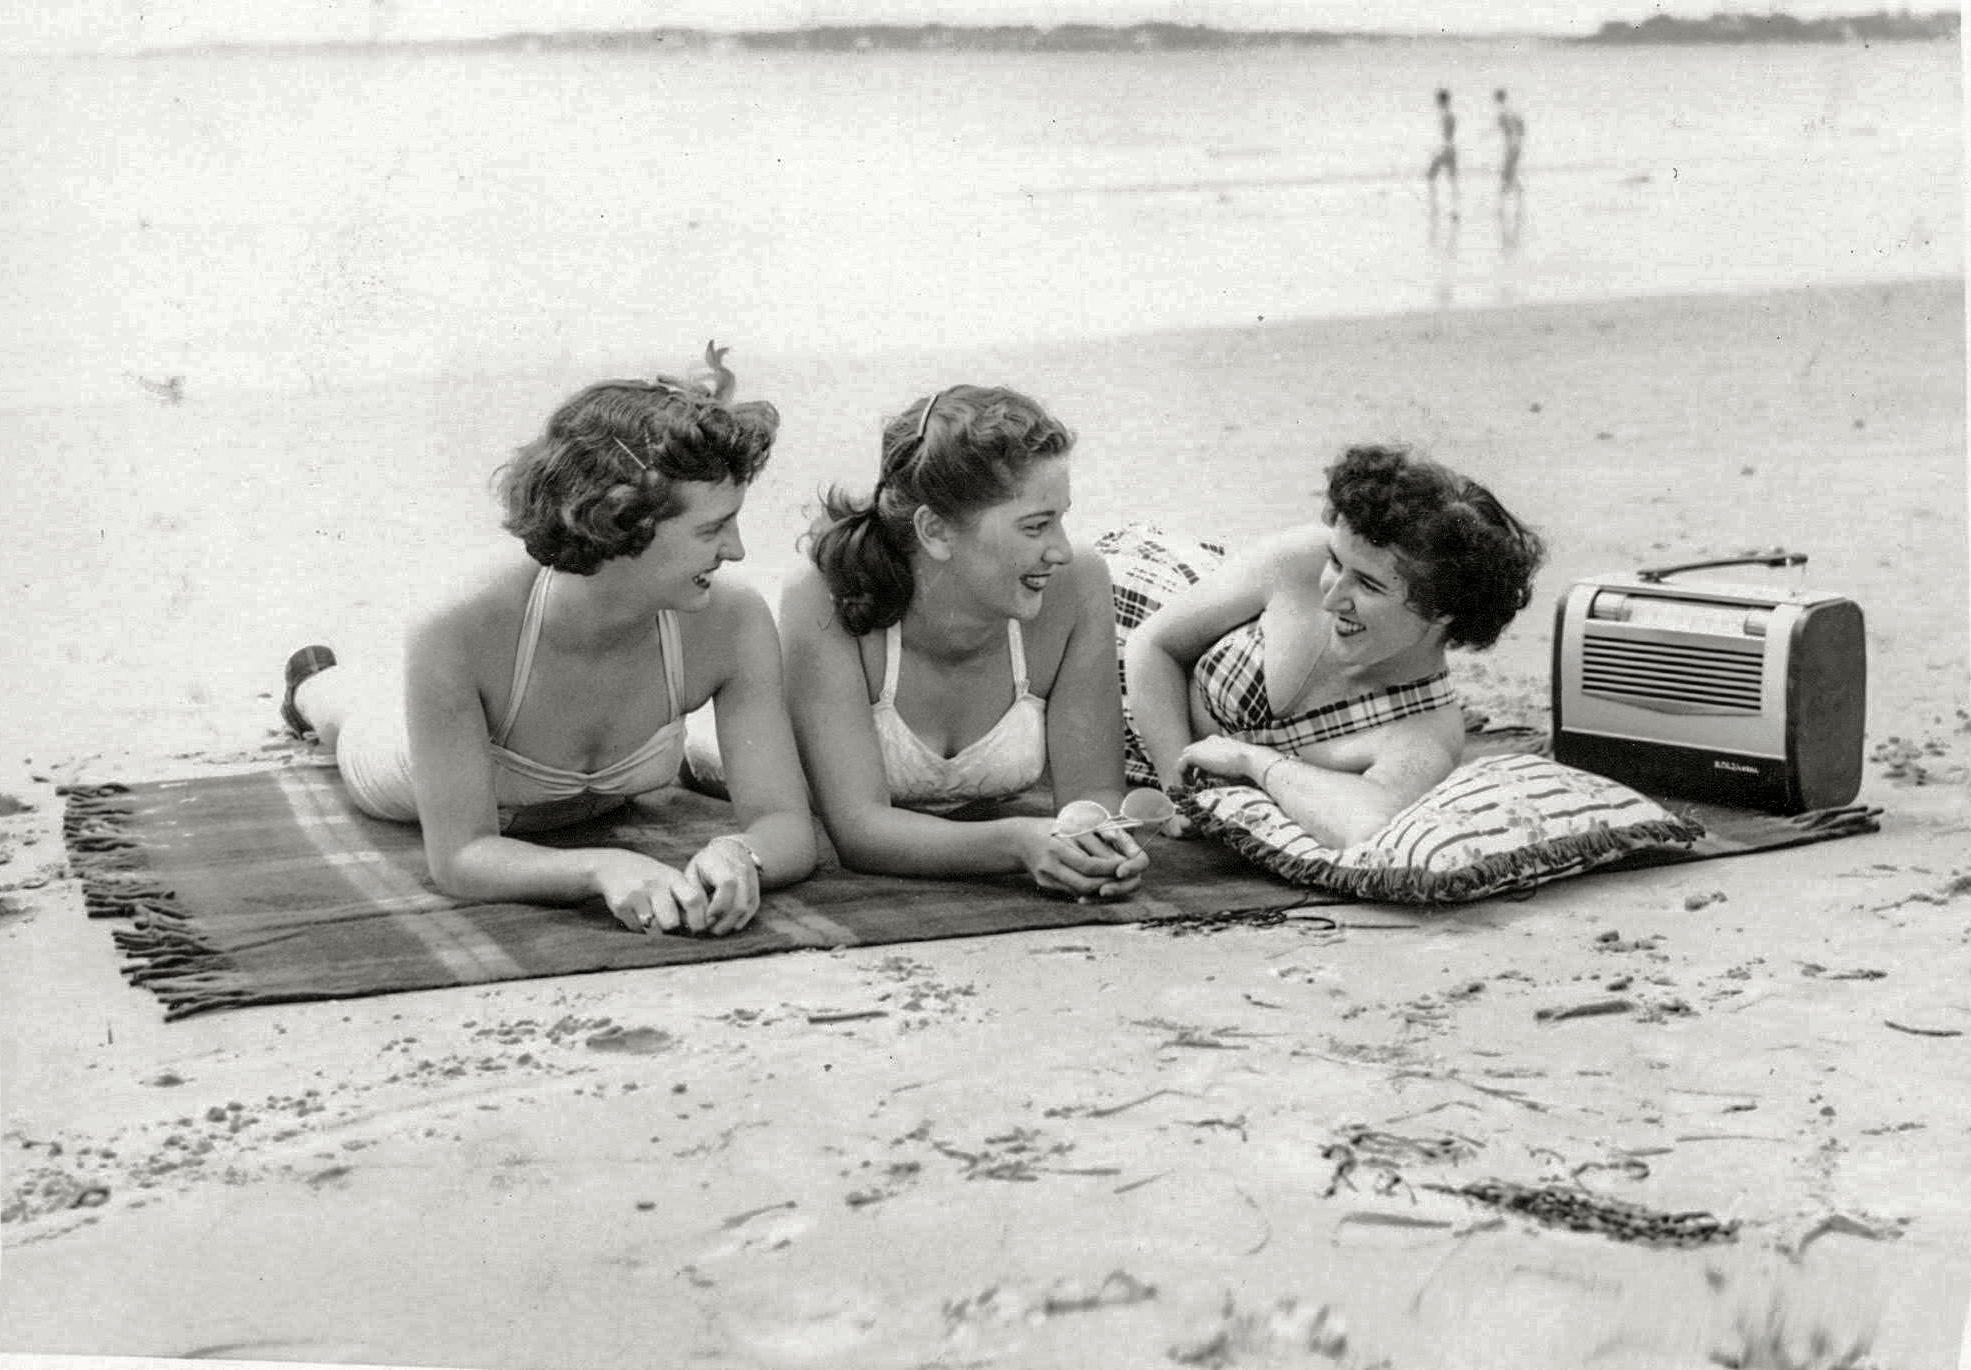 My mother, far left, with some of her young and attractive co-workers from Salem Gas & Electric posing for the New England Electric System magazine cover in the early spring of 1951.  The photo shoot took place on King's Beach in Swampscott, Massachusetts. Enjoying ideal beach weather are Phyllis Collins (Salem Gas), Betty Konopnicki (Salem Electric) and Lil Bouchard (Salem Gas). View full size.